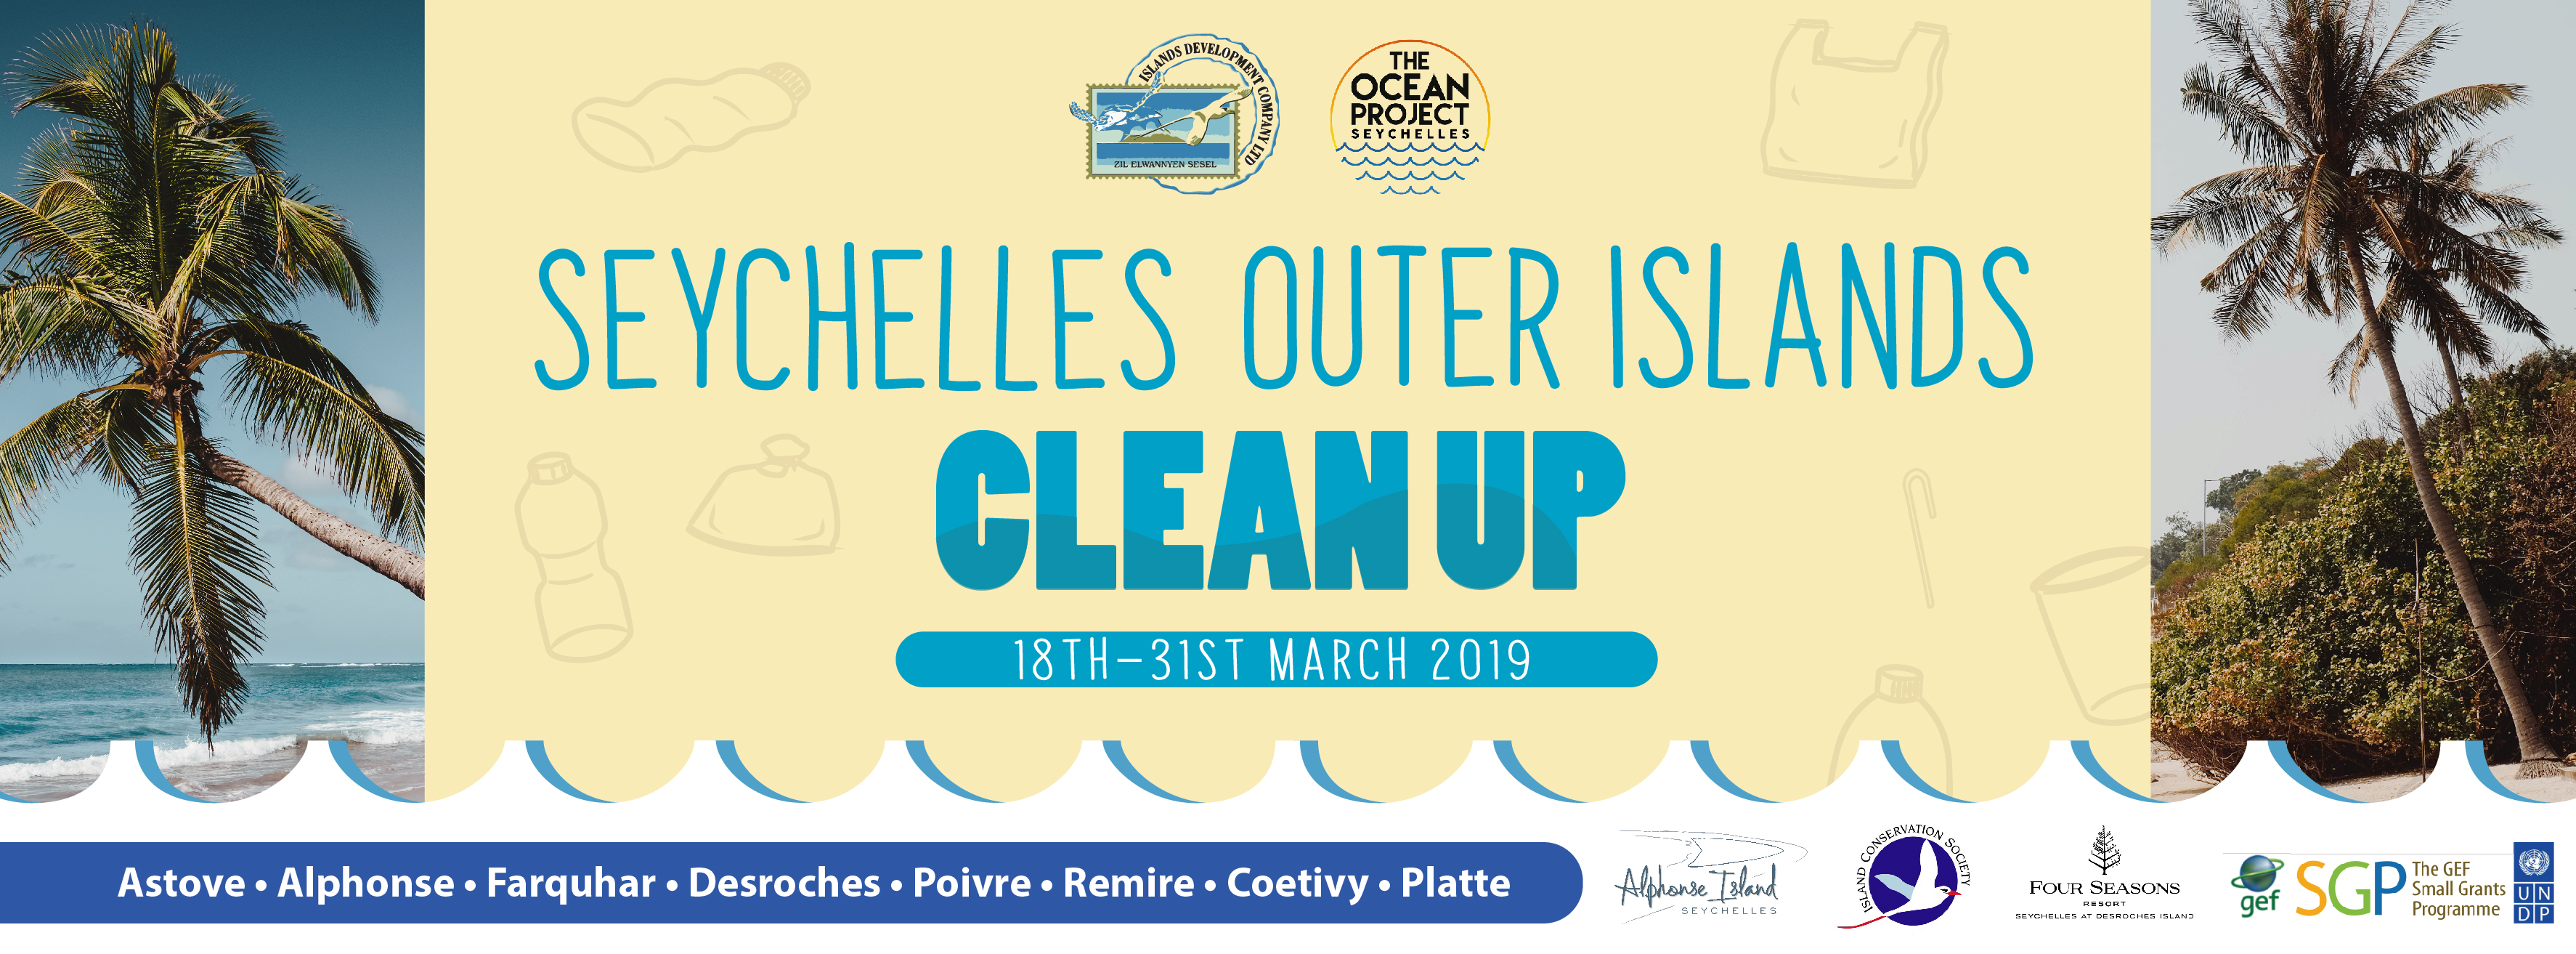 seychelles outer islands clean up